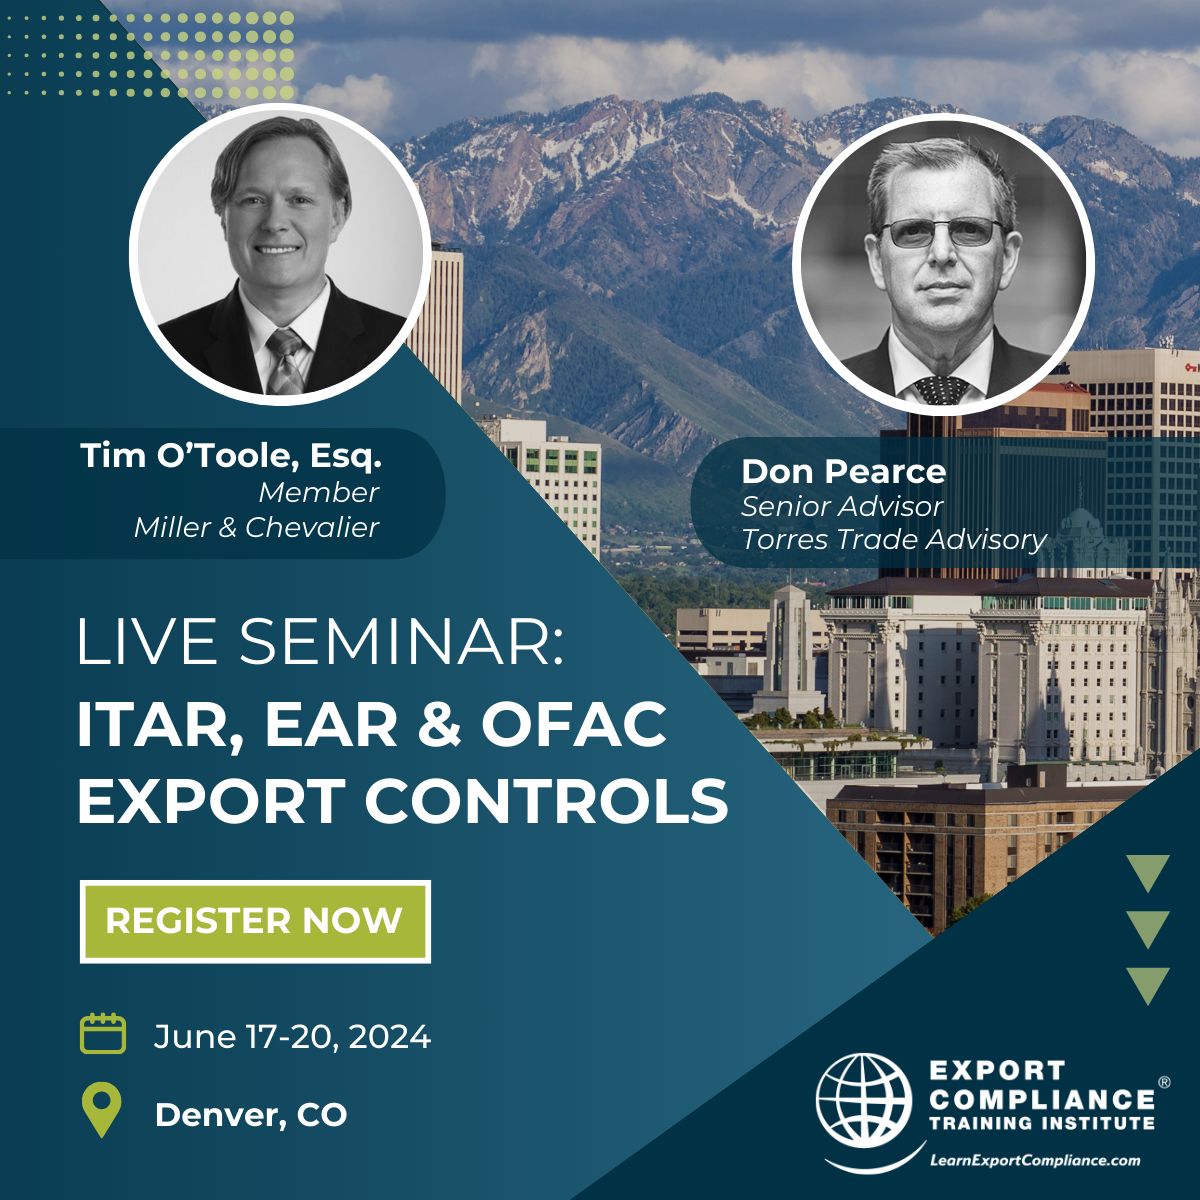 Export Compliance Training Institute (ECTI) Presents ITAR, EAR and